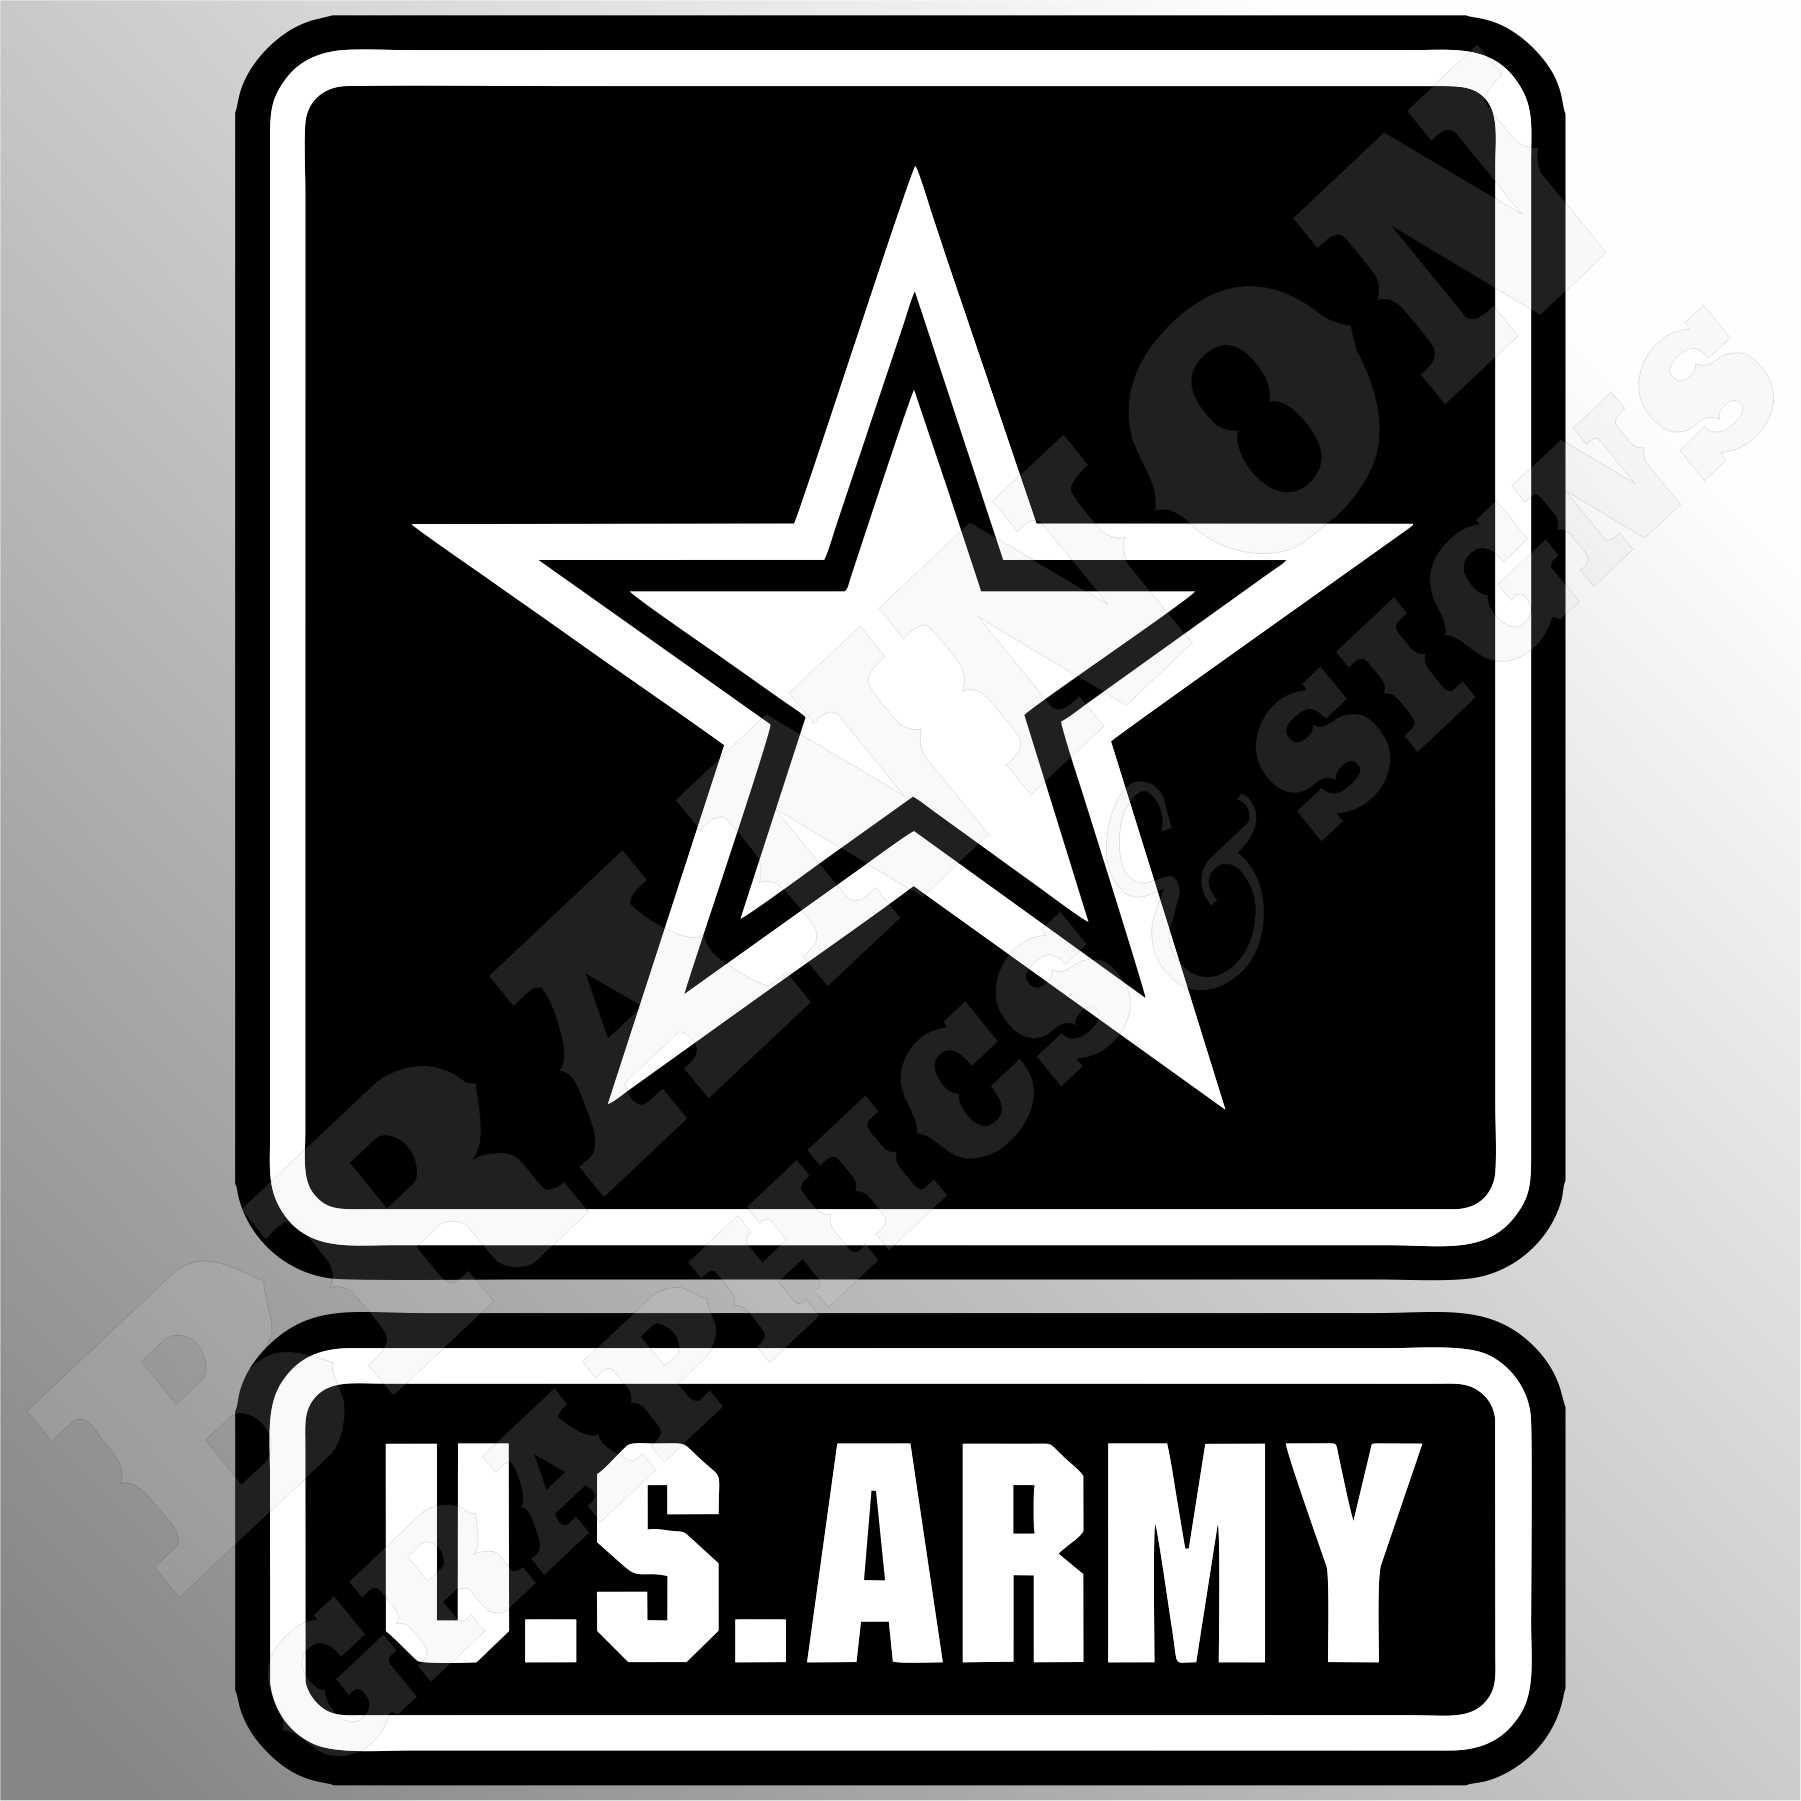 U.S. Army Star Logo - U.S. Army Star Logo Military themed design that can be made into